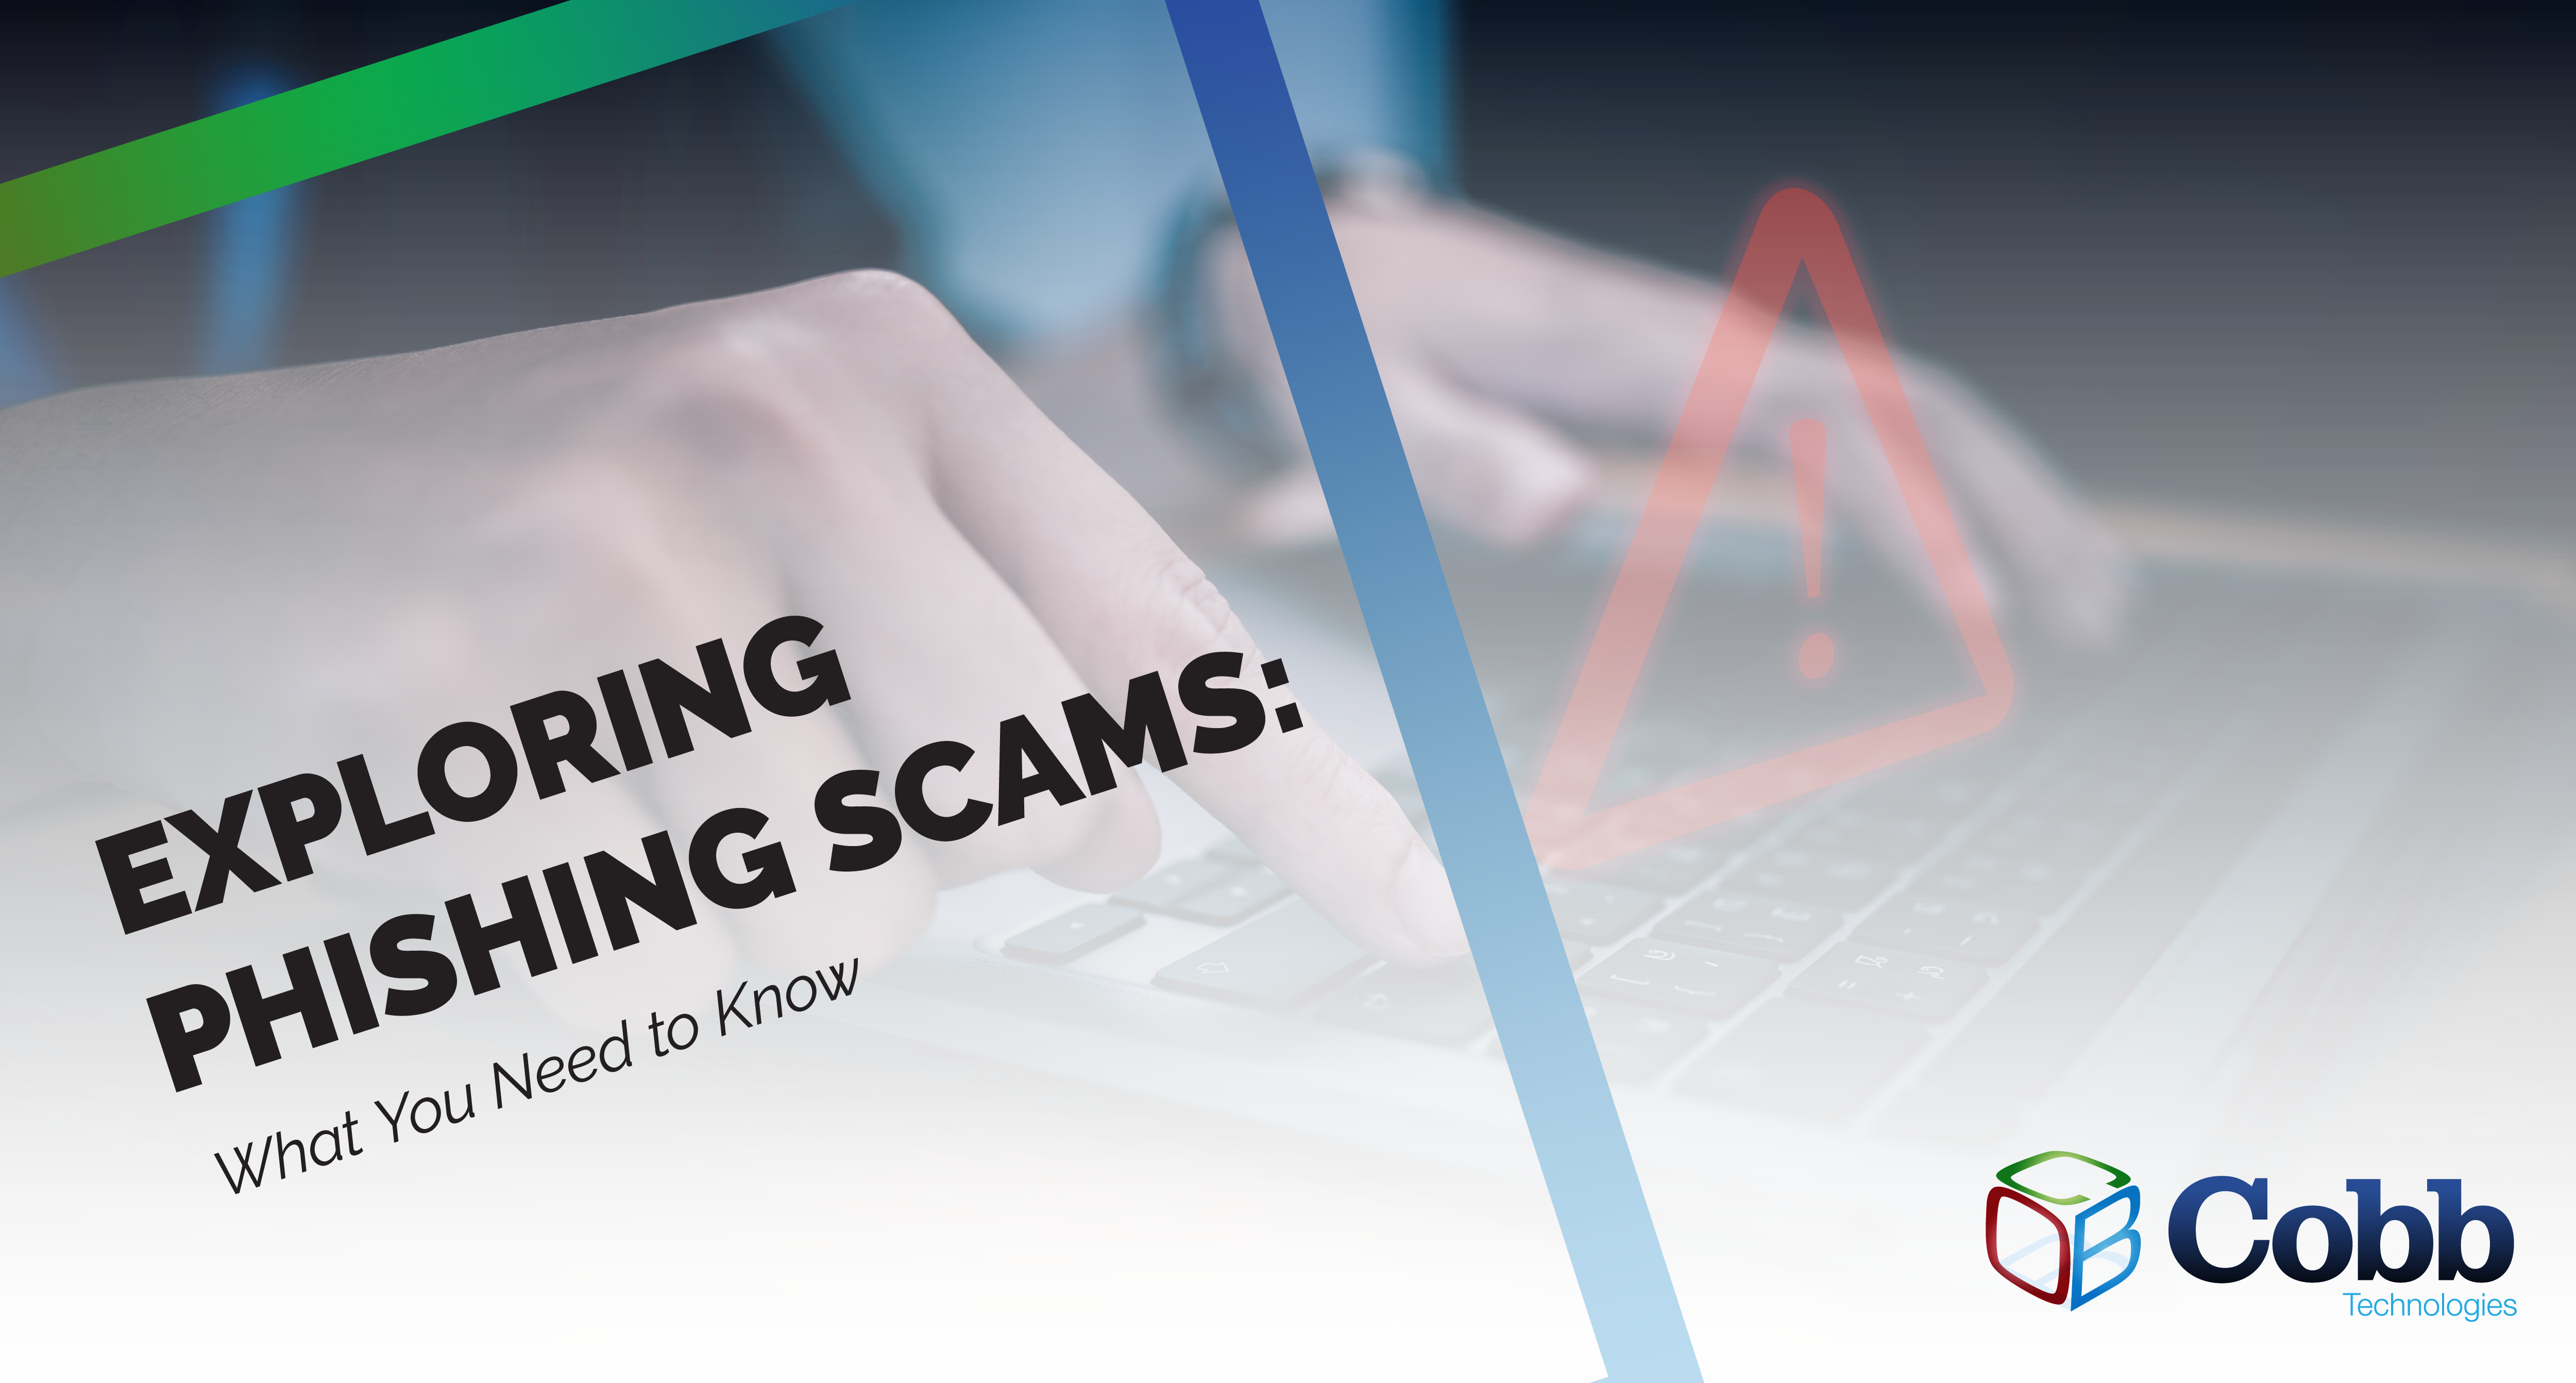 Exploring Phishing Scams: What You Need to Know